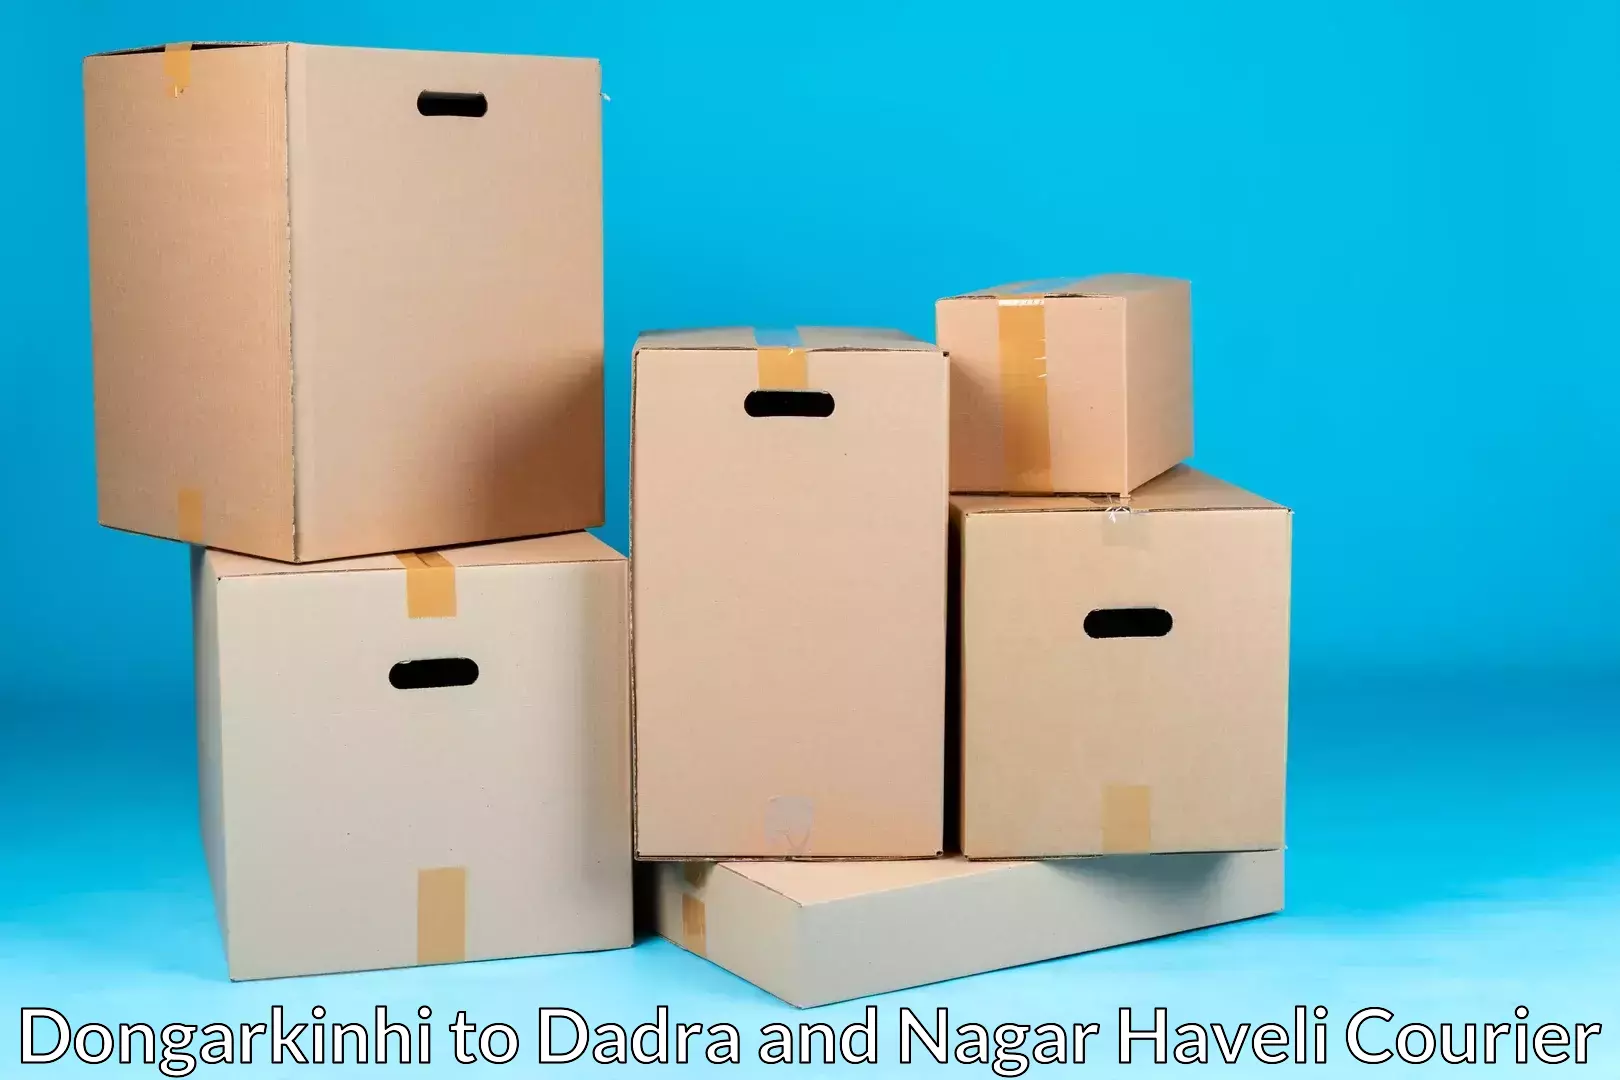 Efficient packing services Dongarkinhi to Dadra and Nagar Haveli